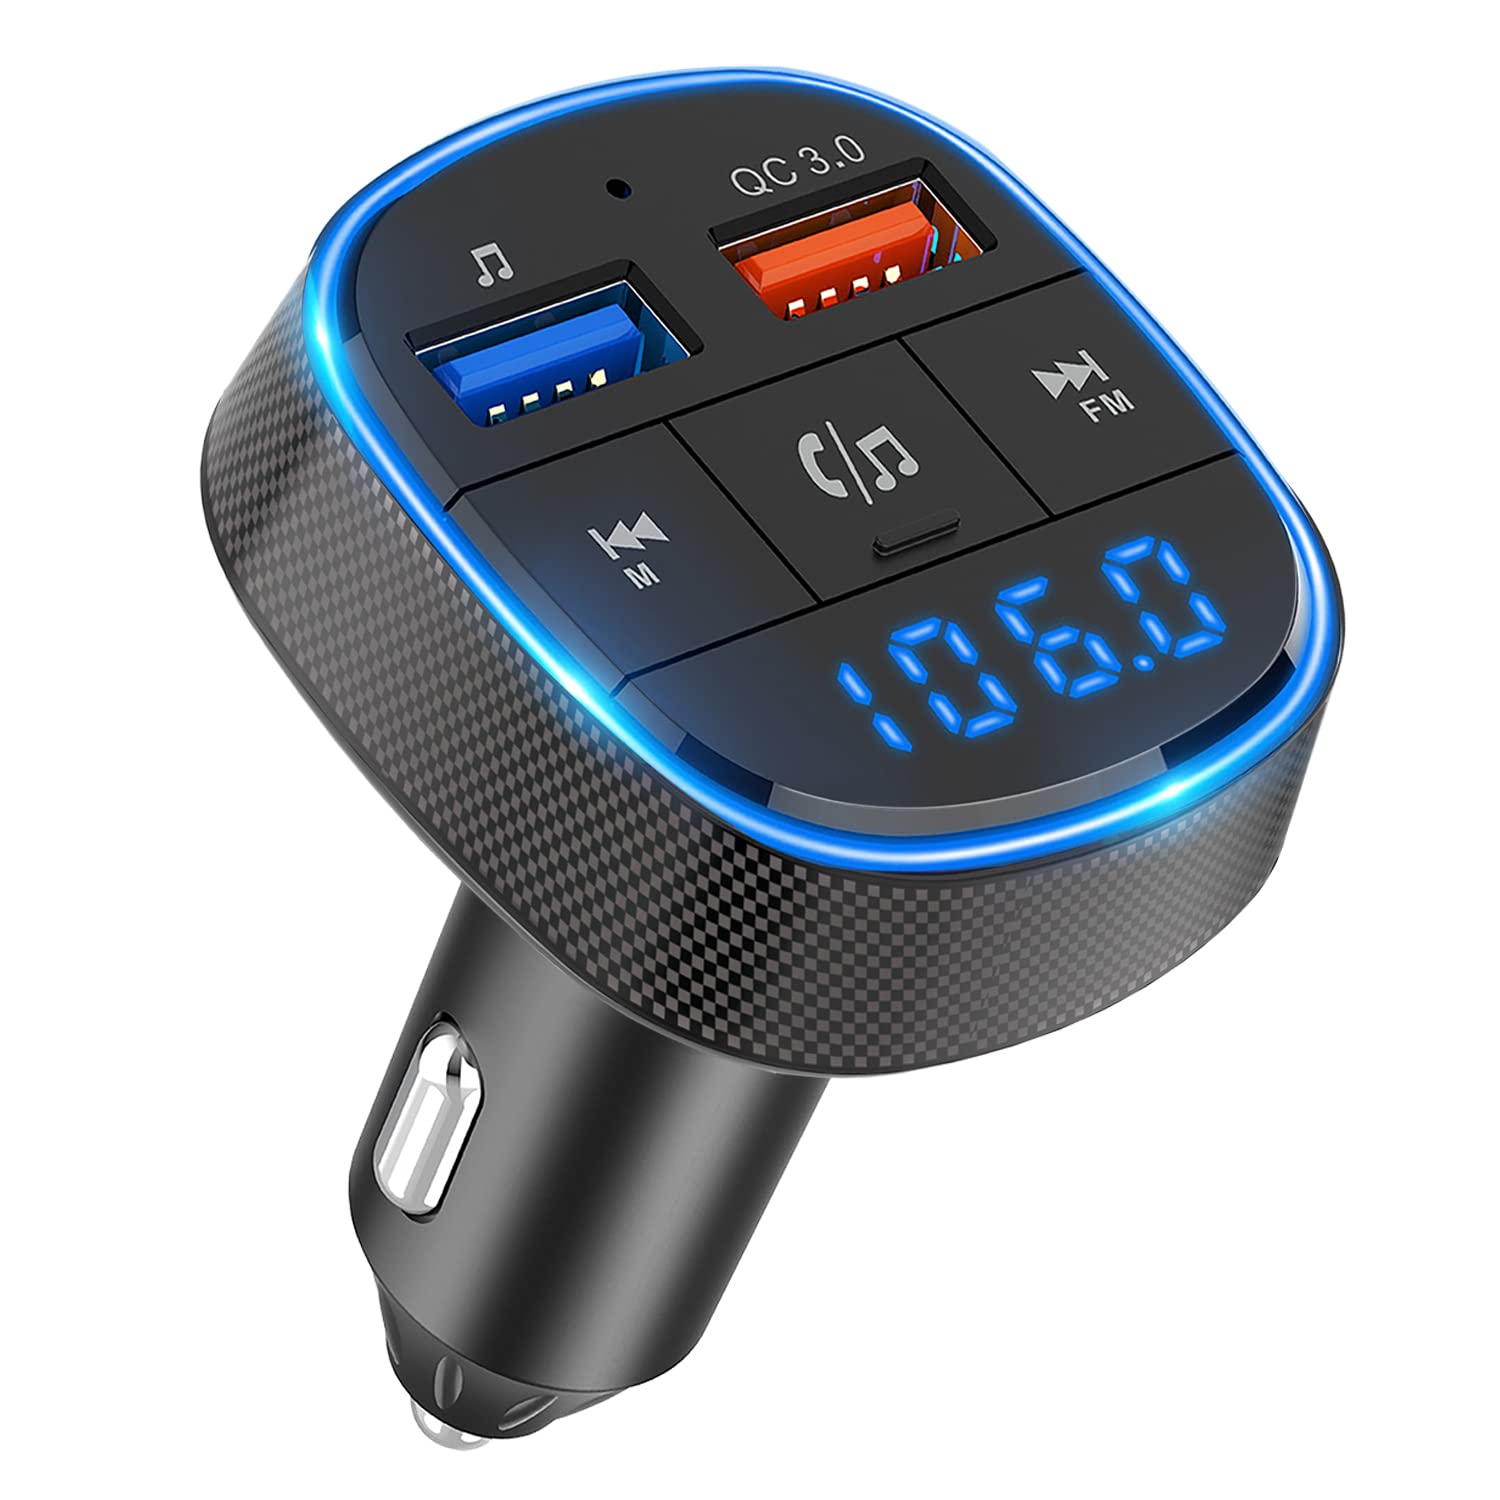 Bluetooth FM Transmitter, Car Radio Audio Adapter with Dual USB Charge Port, MP3 Player Car Charger Support Hands-free Calling, USB Drive, SD Card